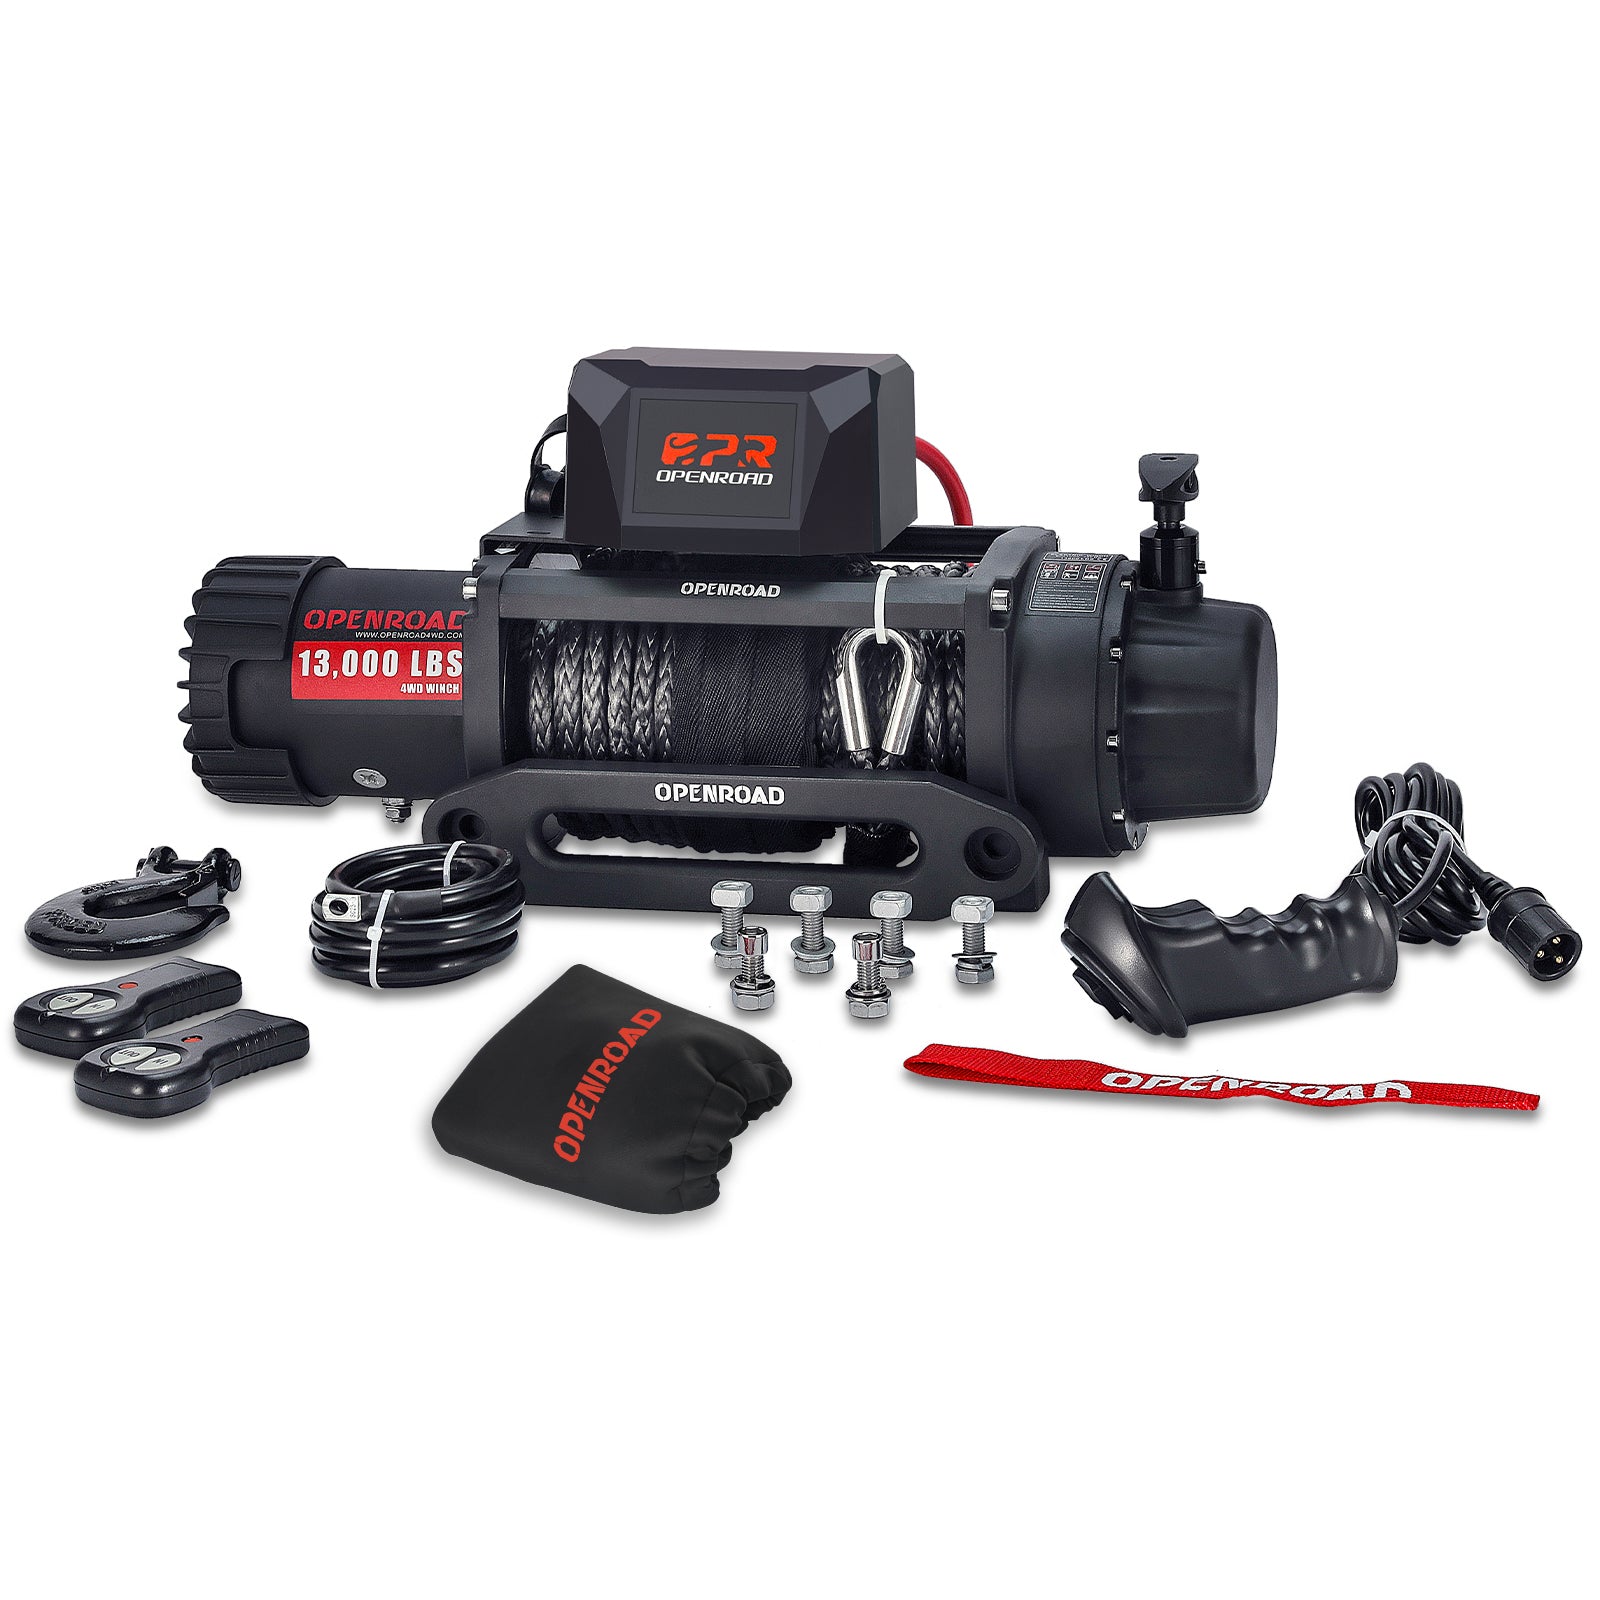 OPENROAD 13,000lbs Winch with Synthetic Rope and 2 Wireless Remotes -Panther Series 2S Plus winch OPENROAD 13000lbs Add Cover  